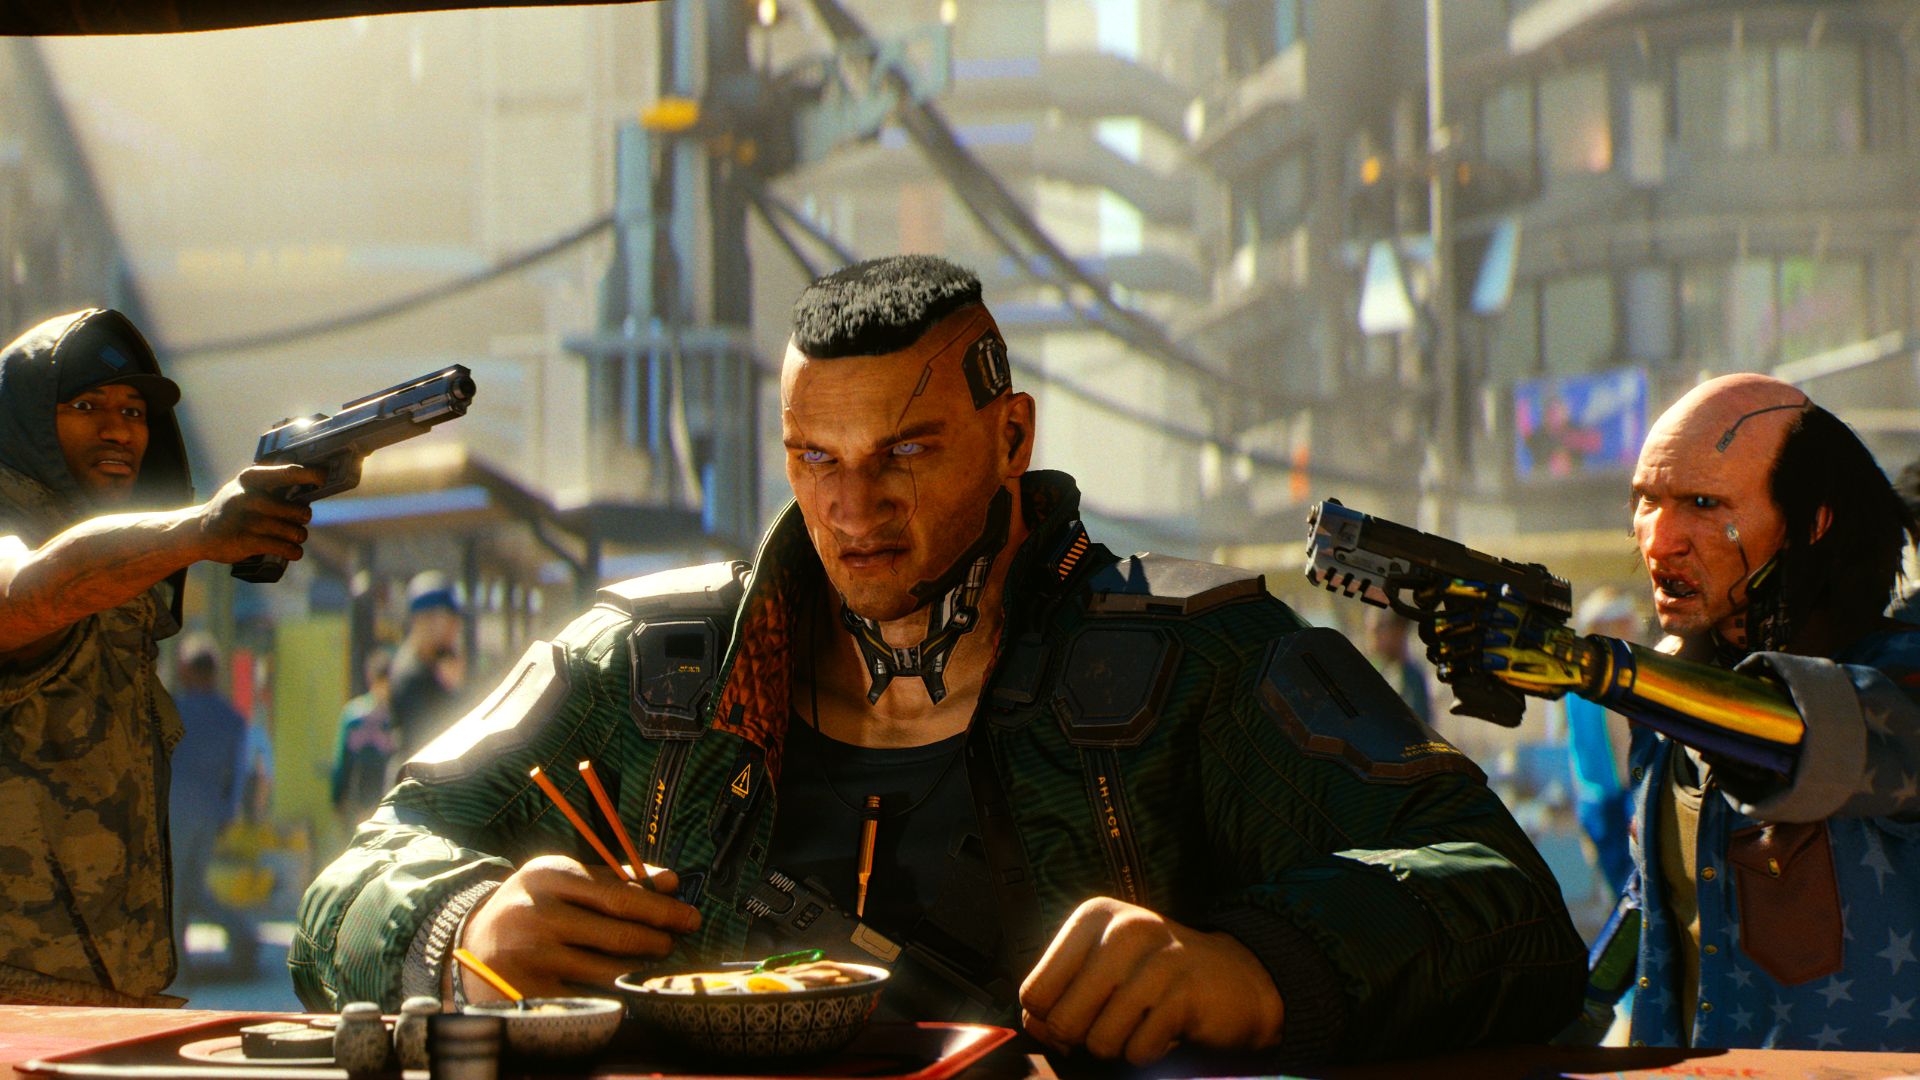 Cyberpunk 2077 Phantom Liberty to be only major expansion says CDPR